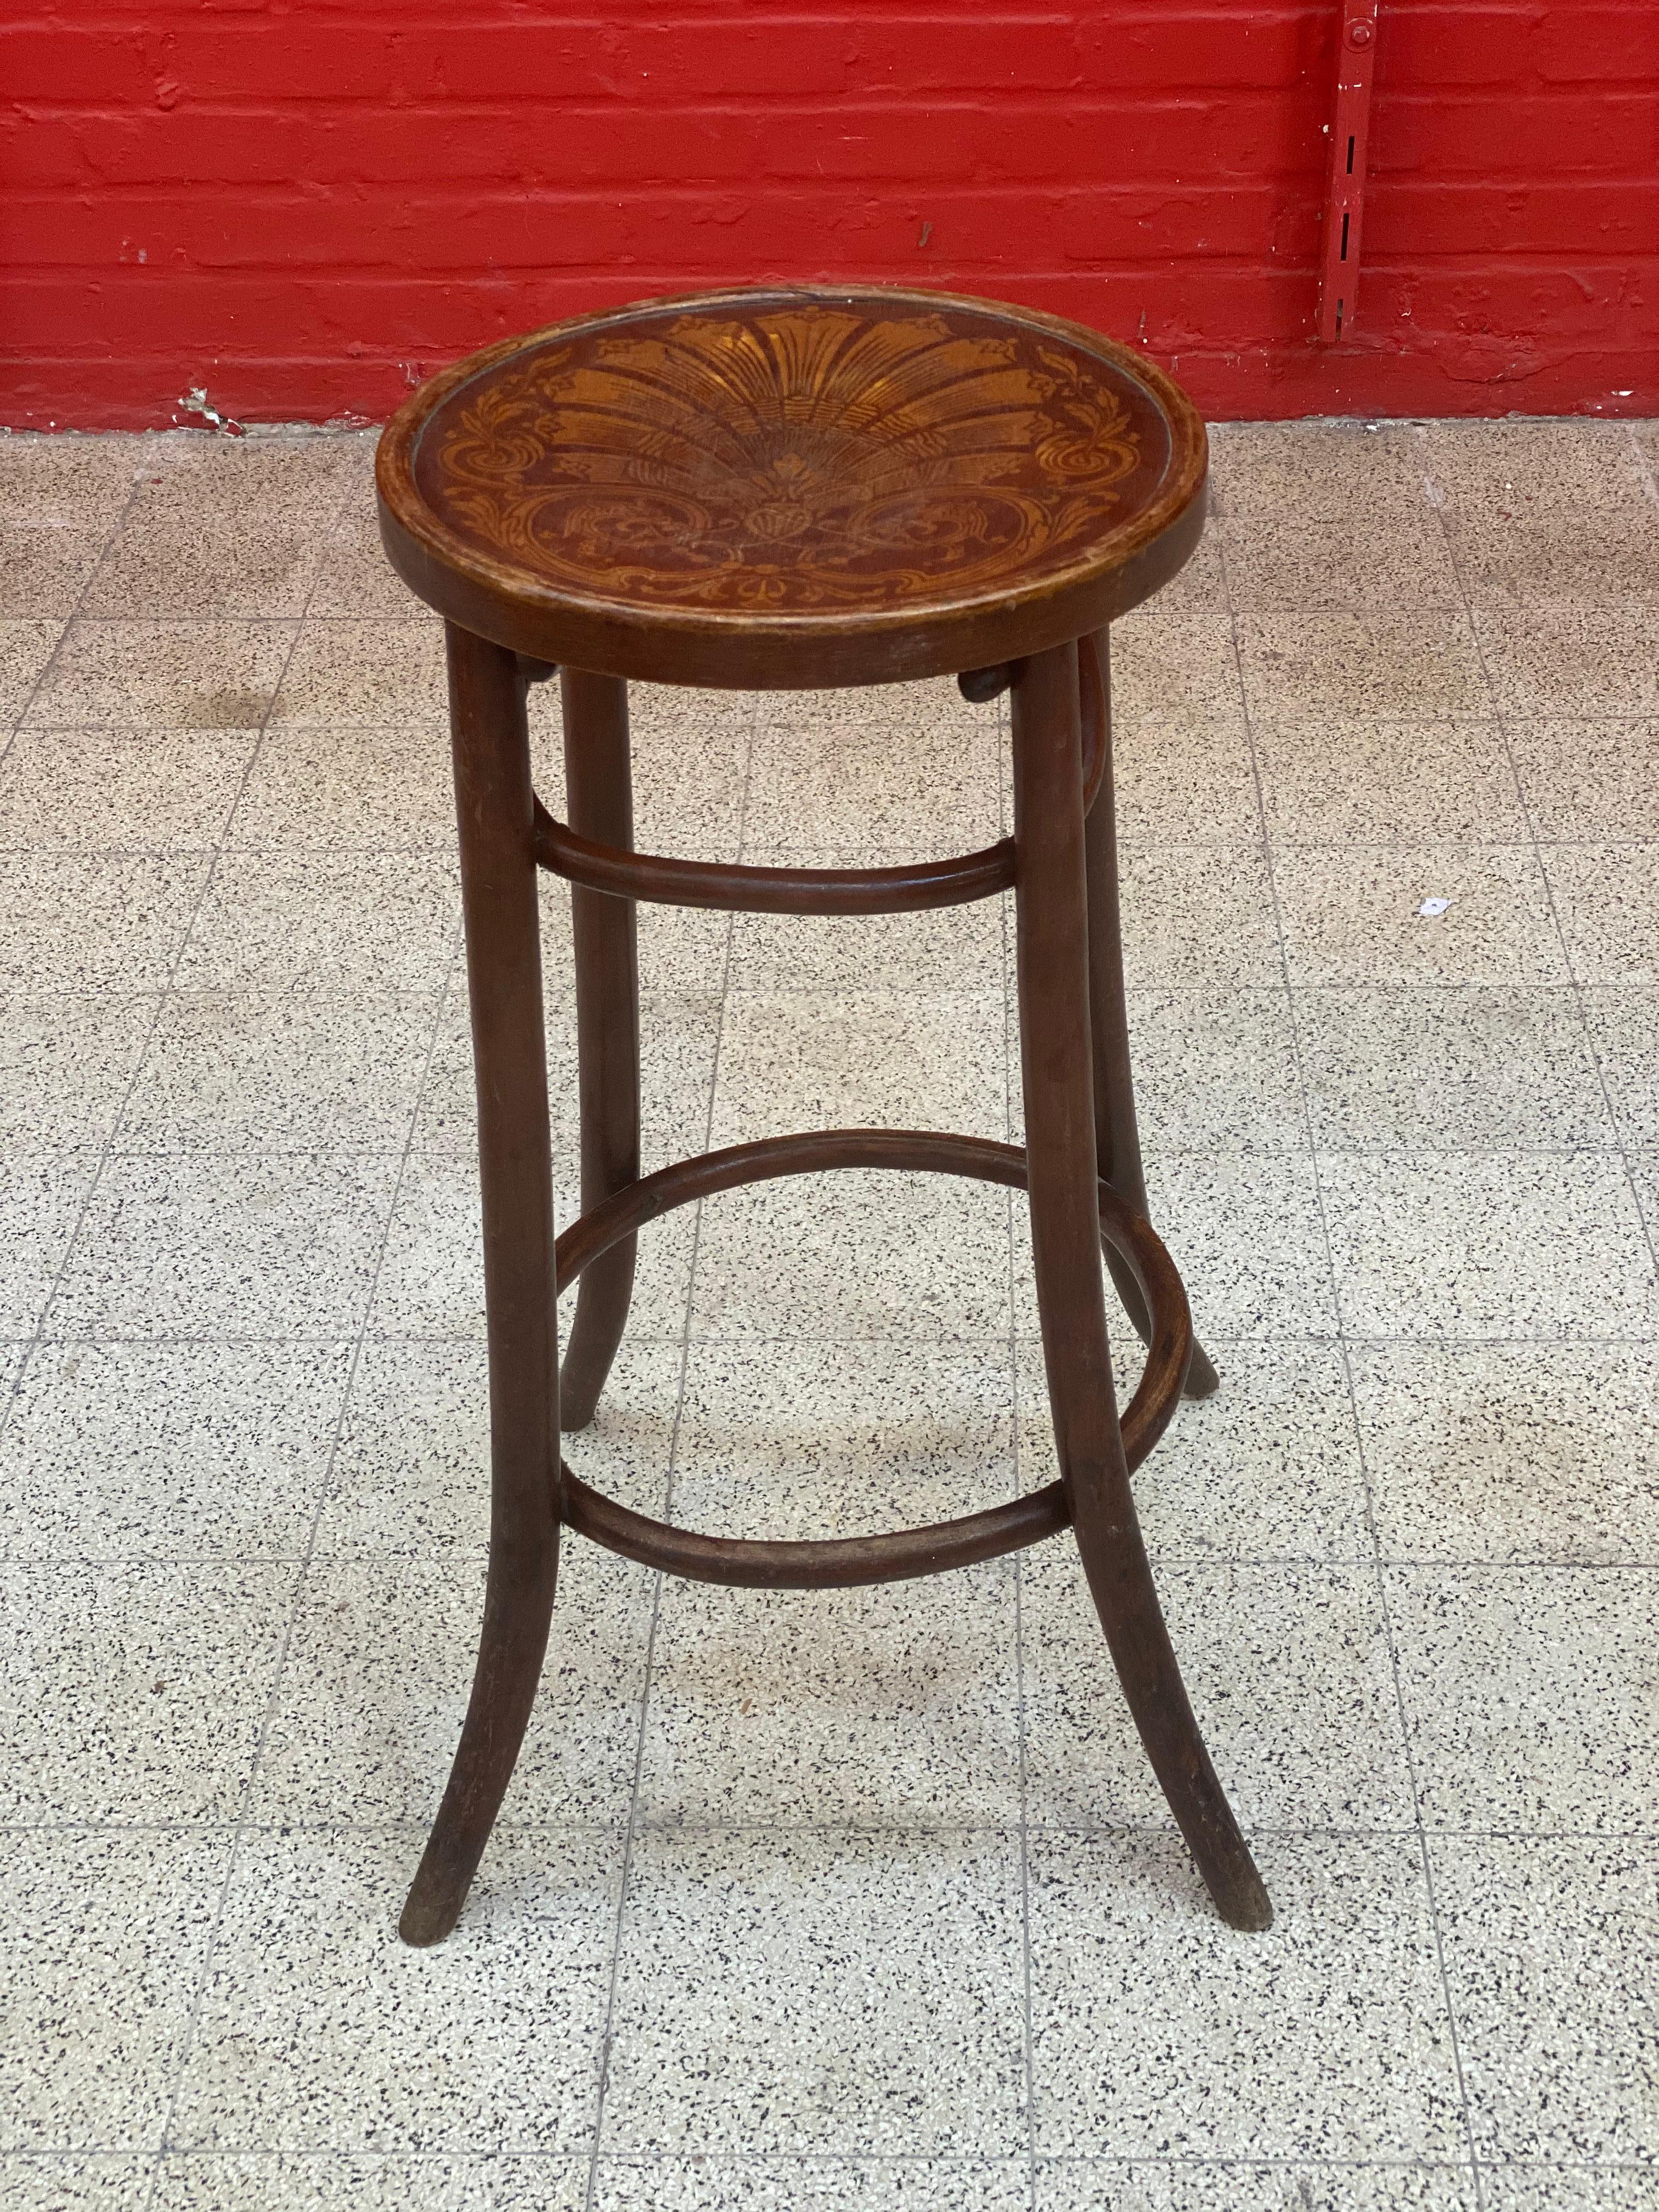 European Art Nouveau Stool in the Style of Thonet, circa 1930 For Sale